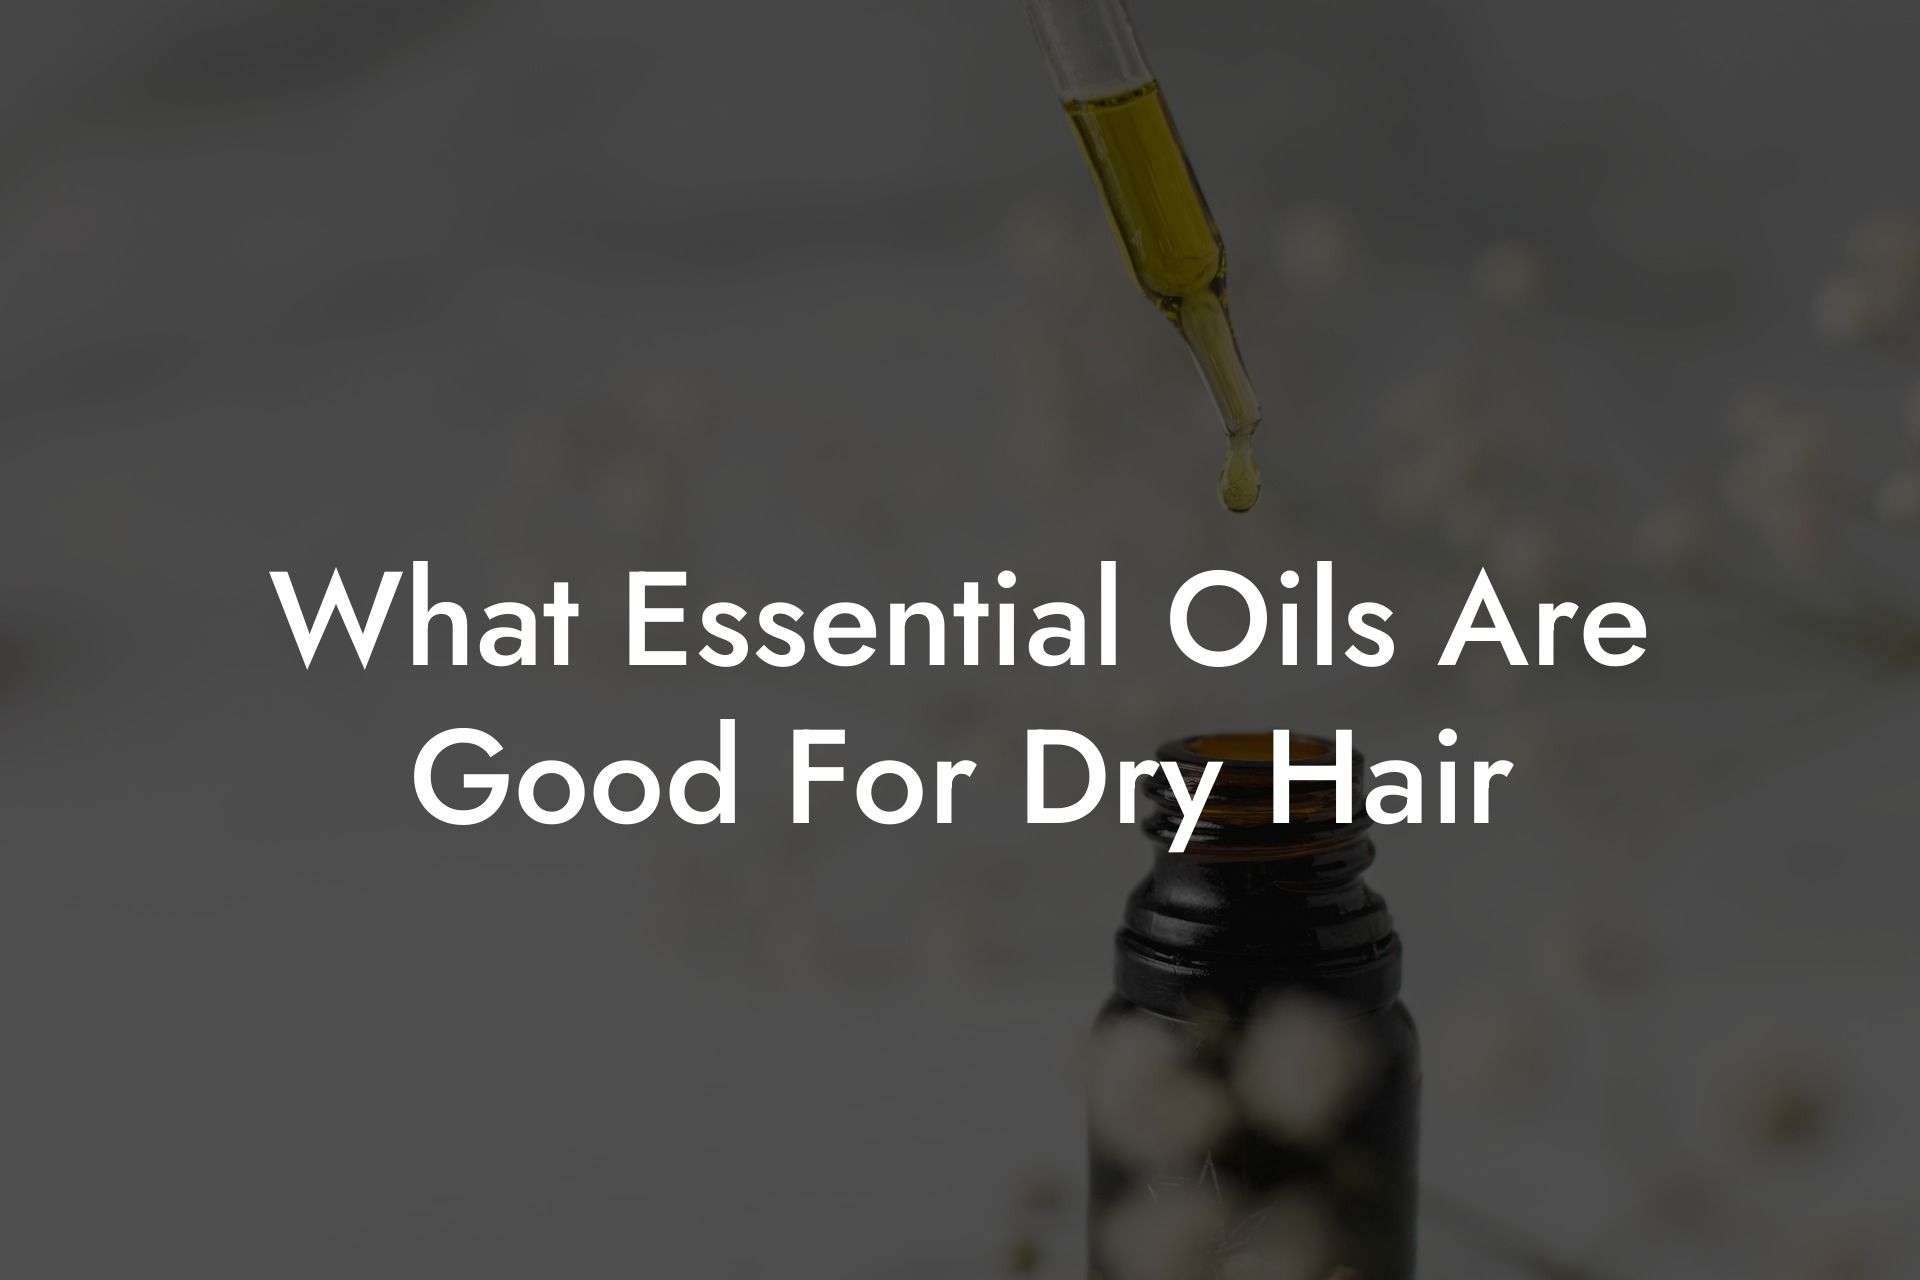 What Essential Oils Are Good For Dry Hair